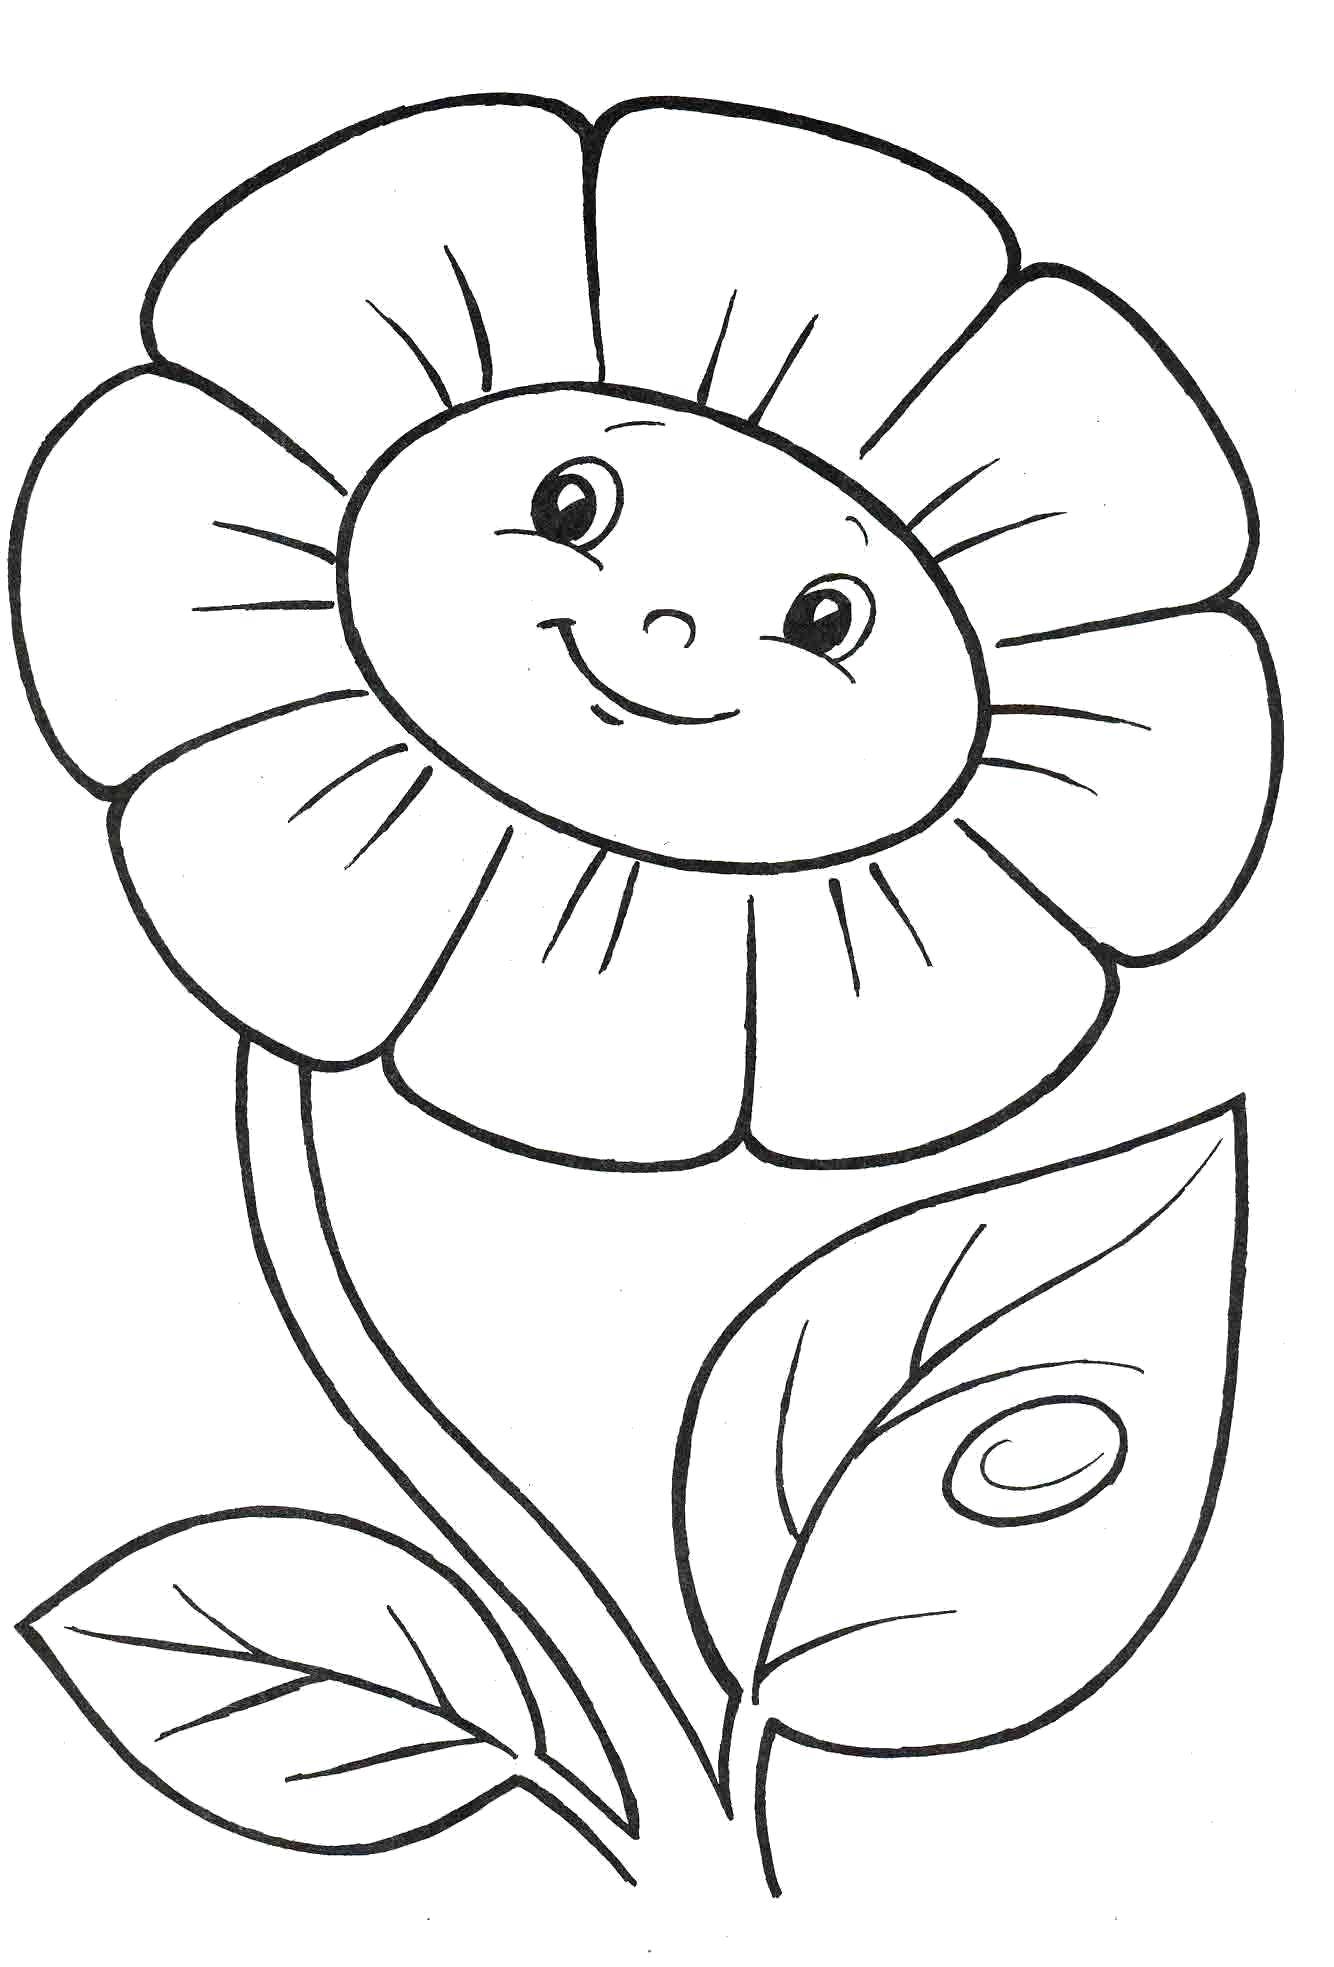 Coloring Smiling Daisy. Category coloring for little ones. Tags:  Flowers, chamomile.